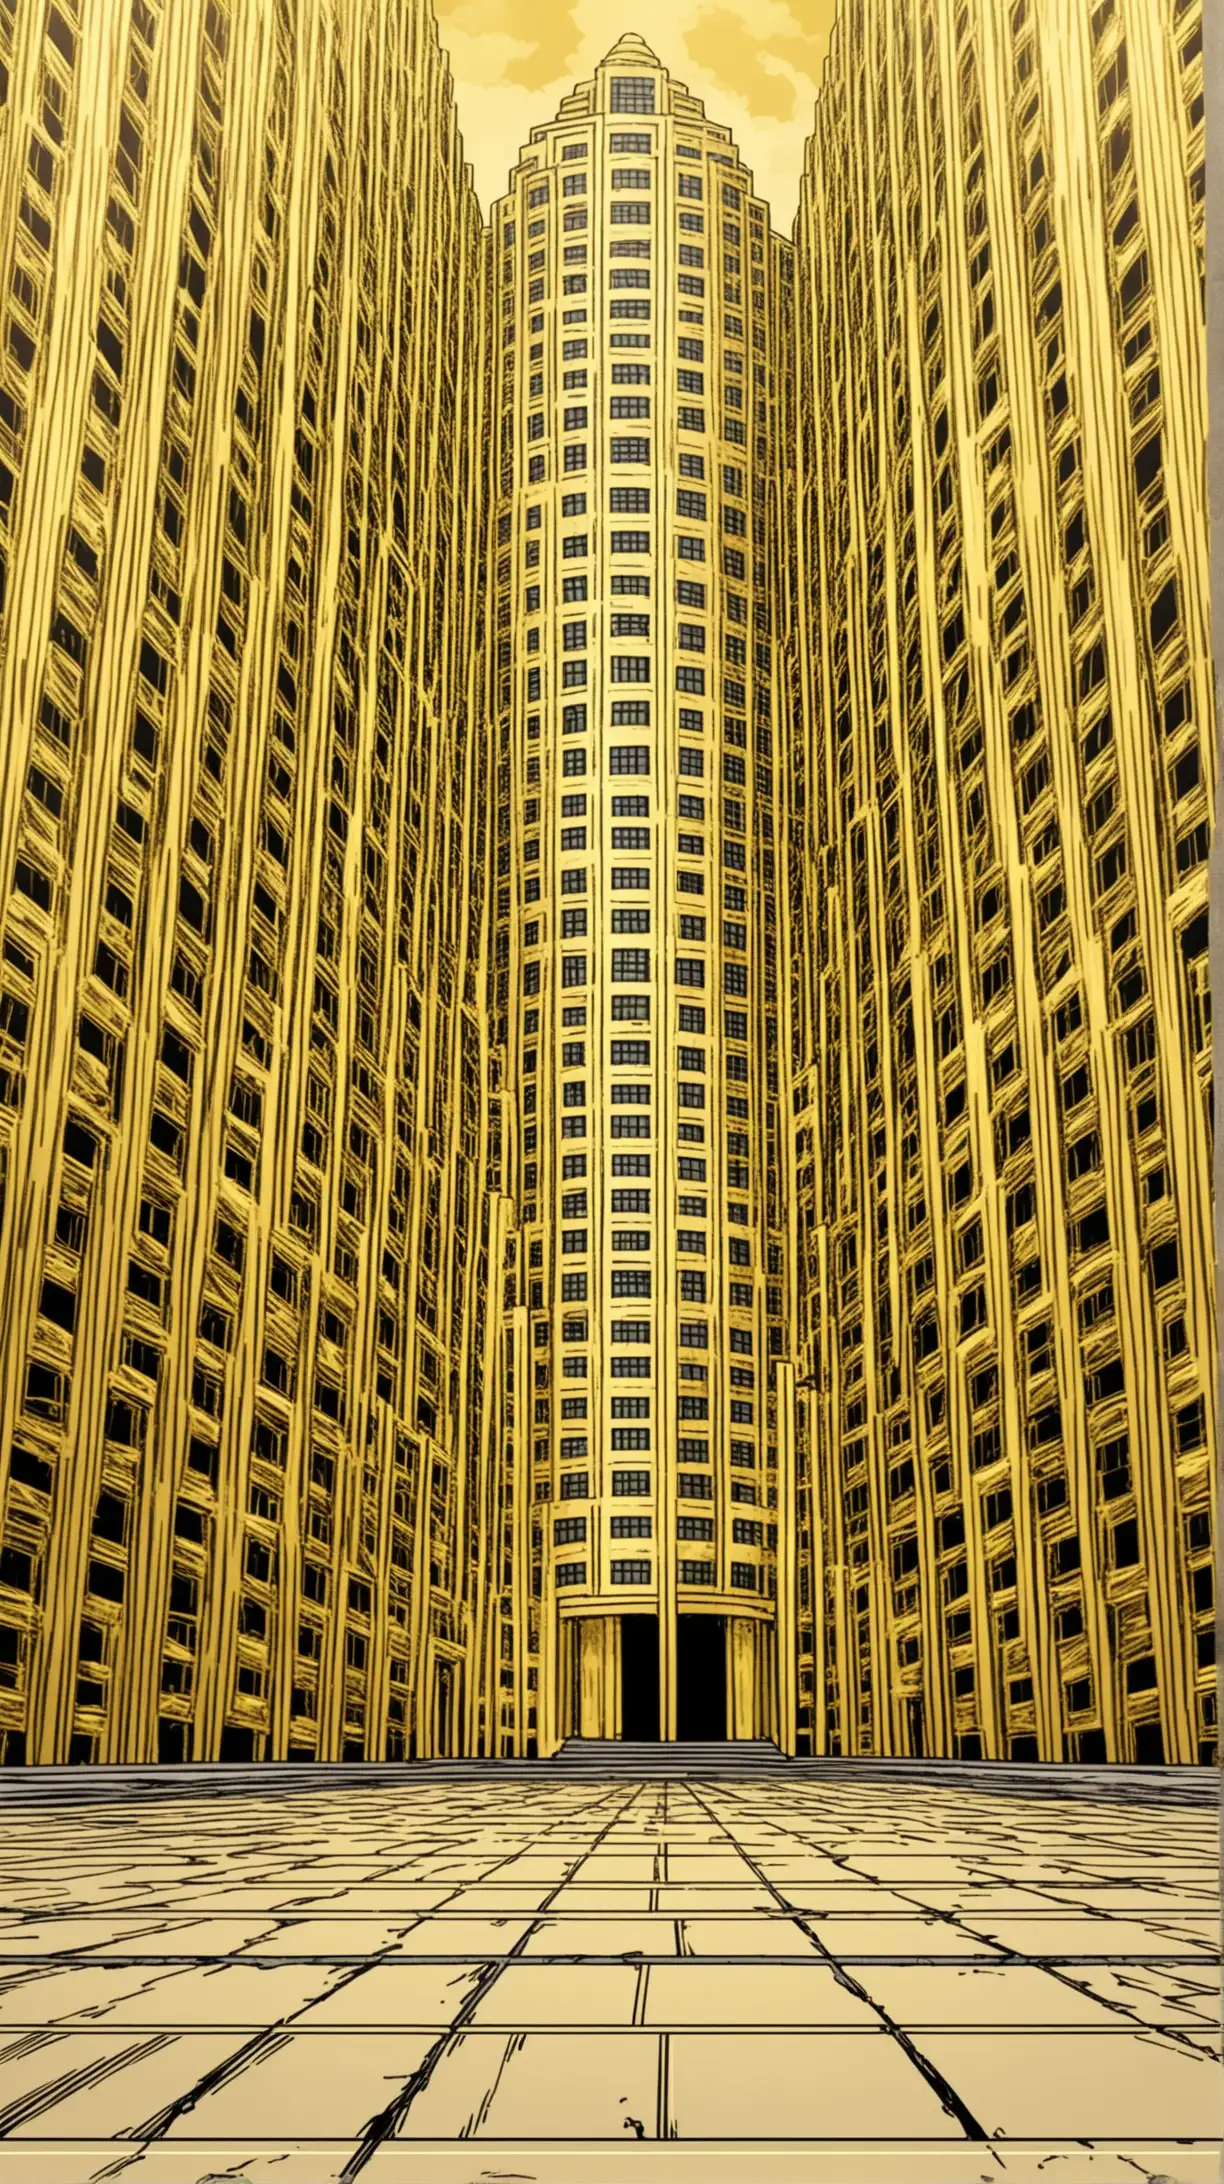 Comic Book Style Gold Building with Symmetrical Facade and Sidewalk